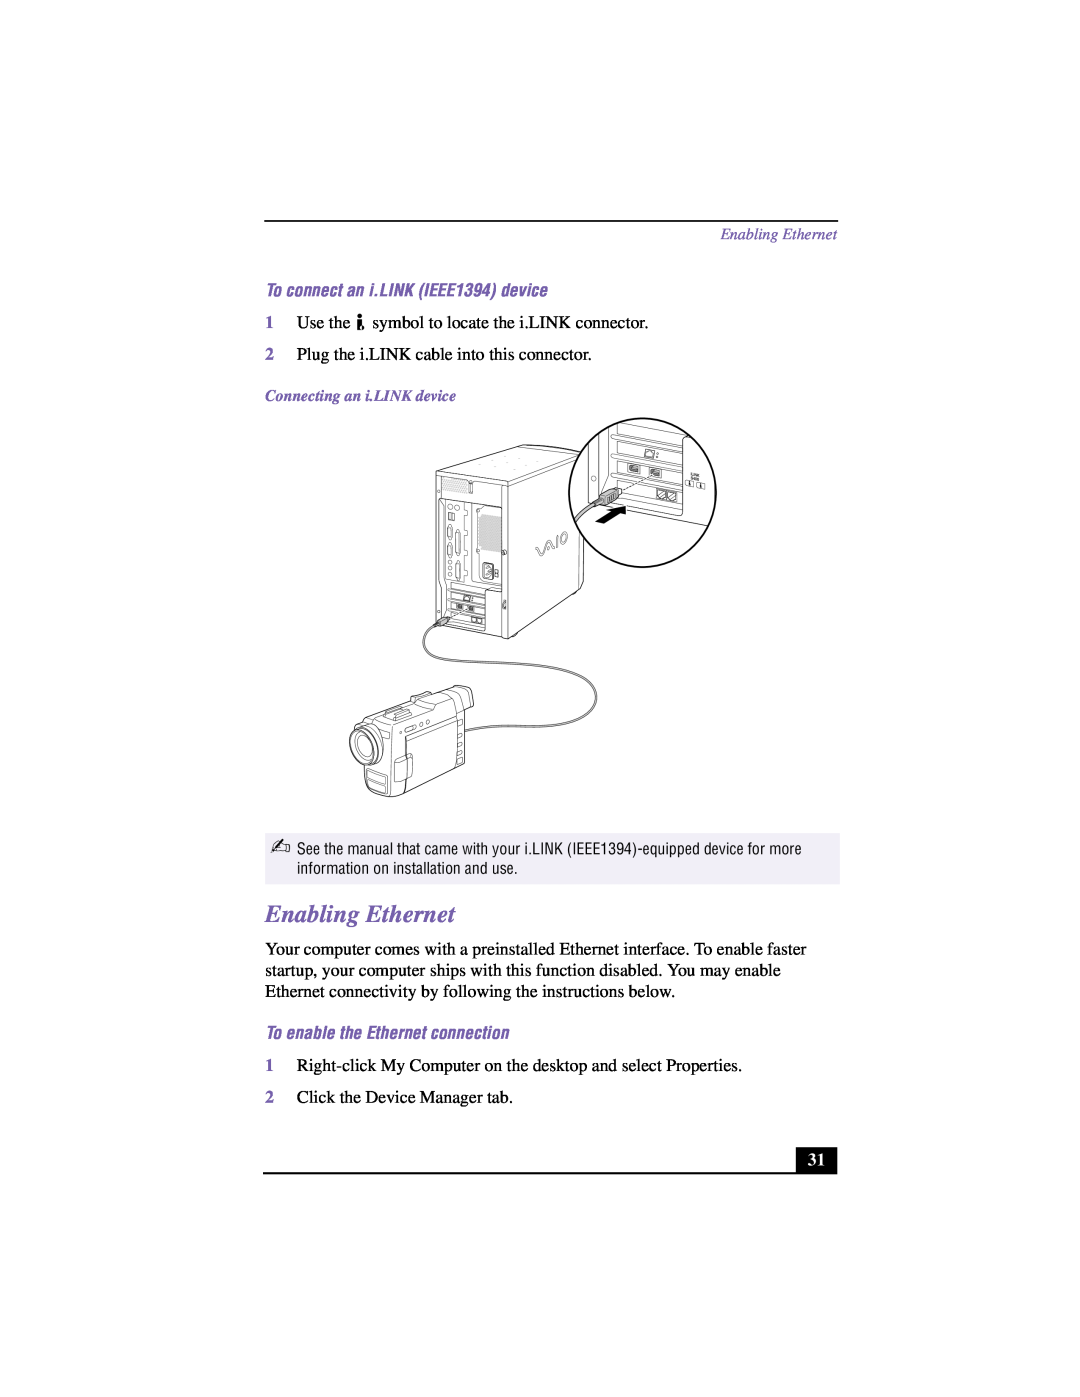 Sony VAIO manual Enabling Ethernet, To connect an i.LINK IEEE1394 device, To enable the Ethernet connection 